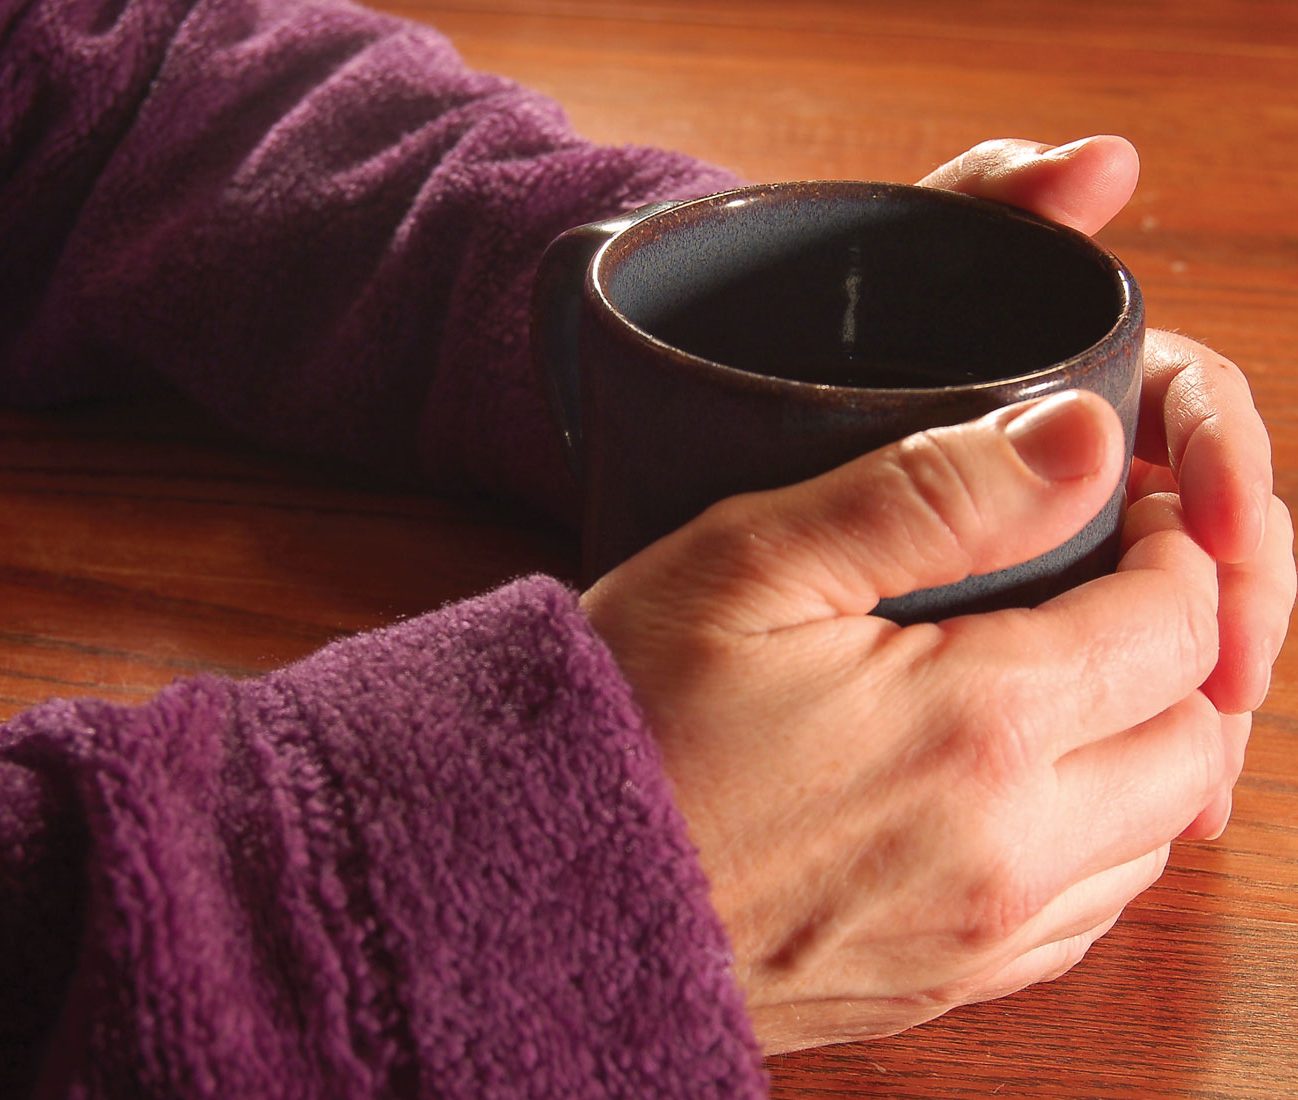 Woman holding a hot beverage